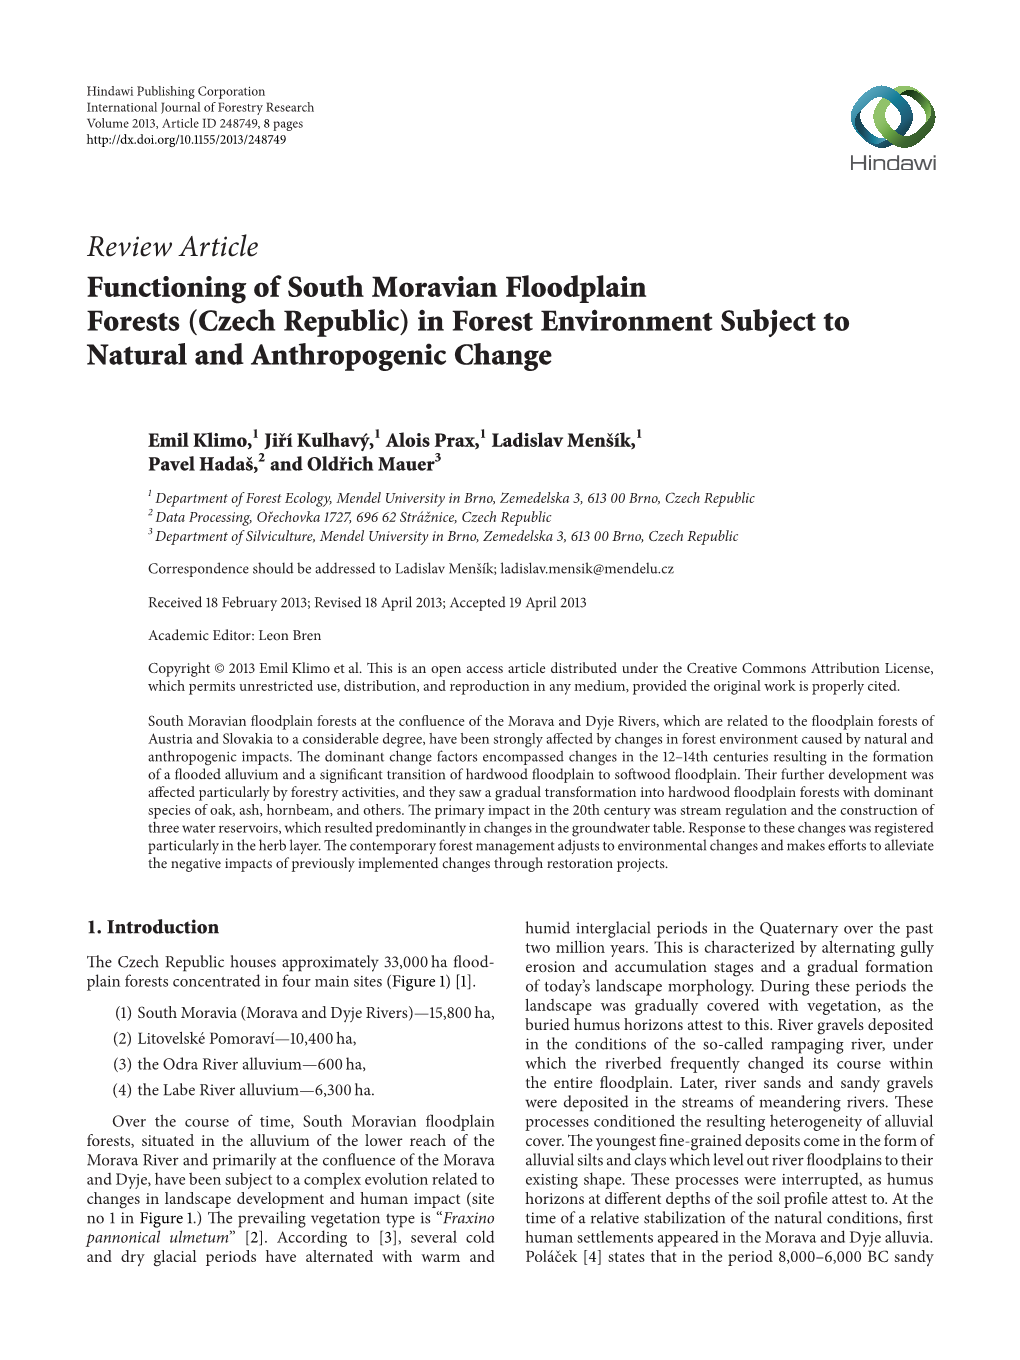 Functioning of South Moravian Floodplain Forests (Czech Republic) in Forest Environment Subject to Natural and Anthropogenic Change